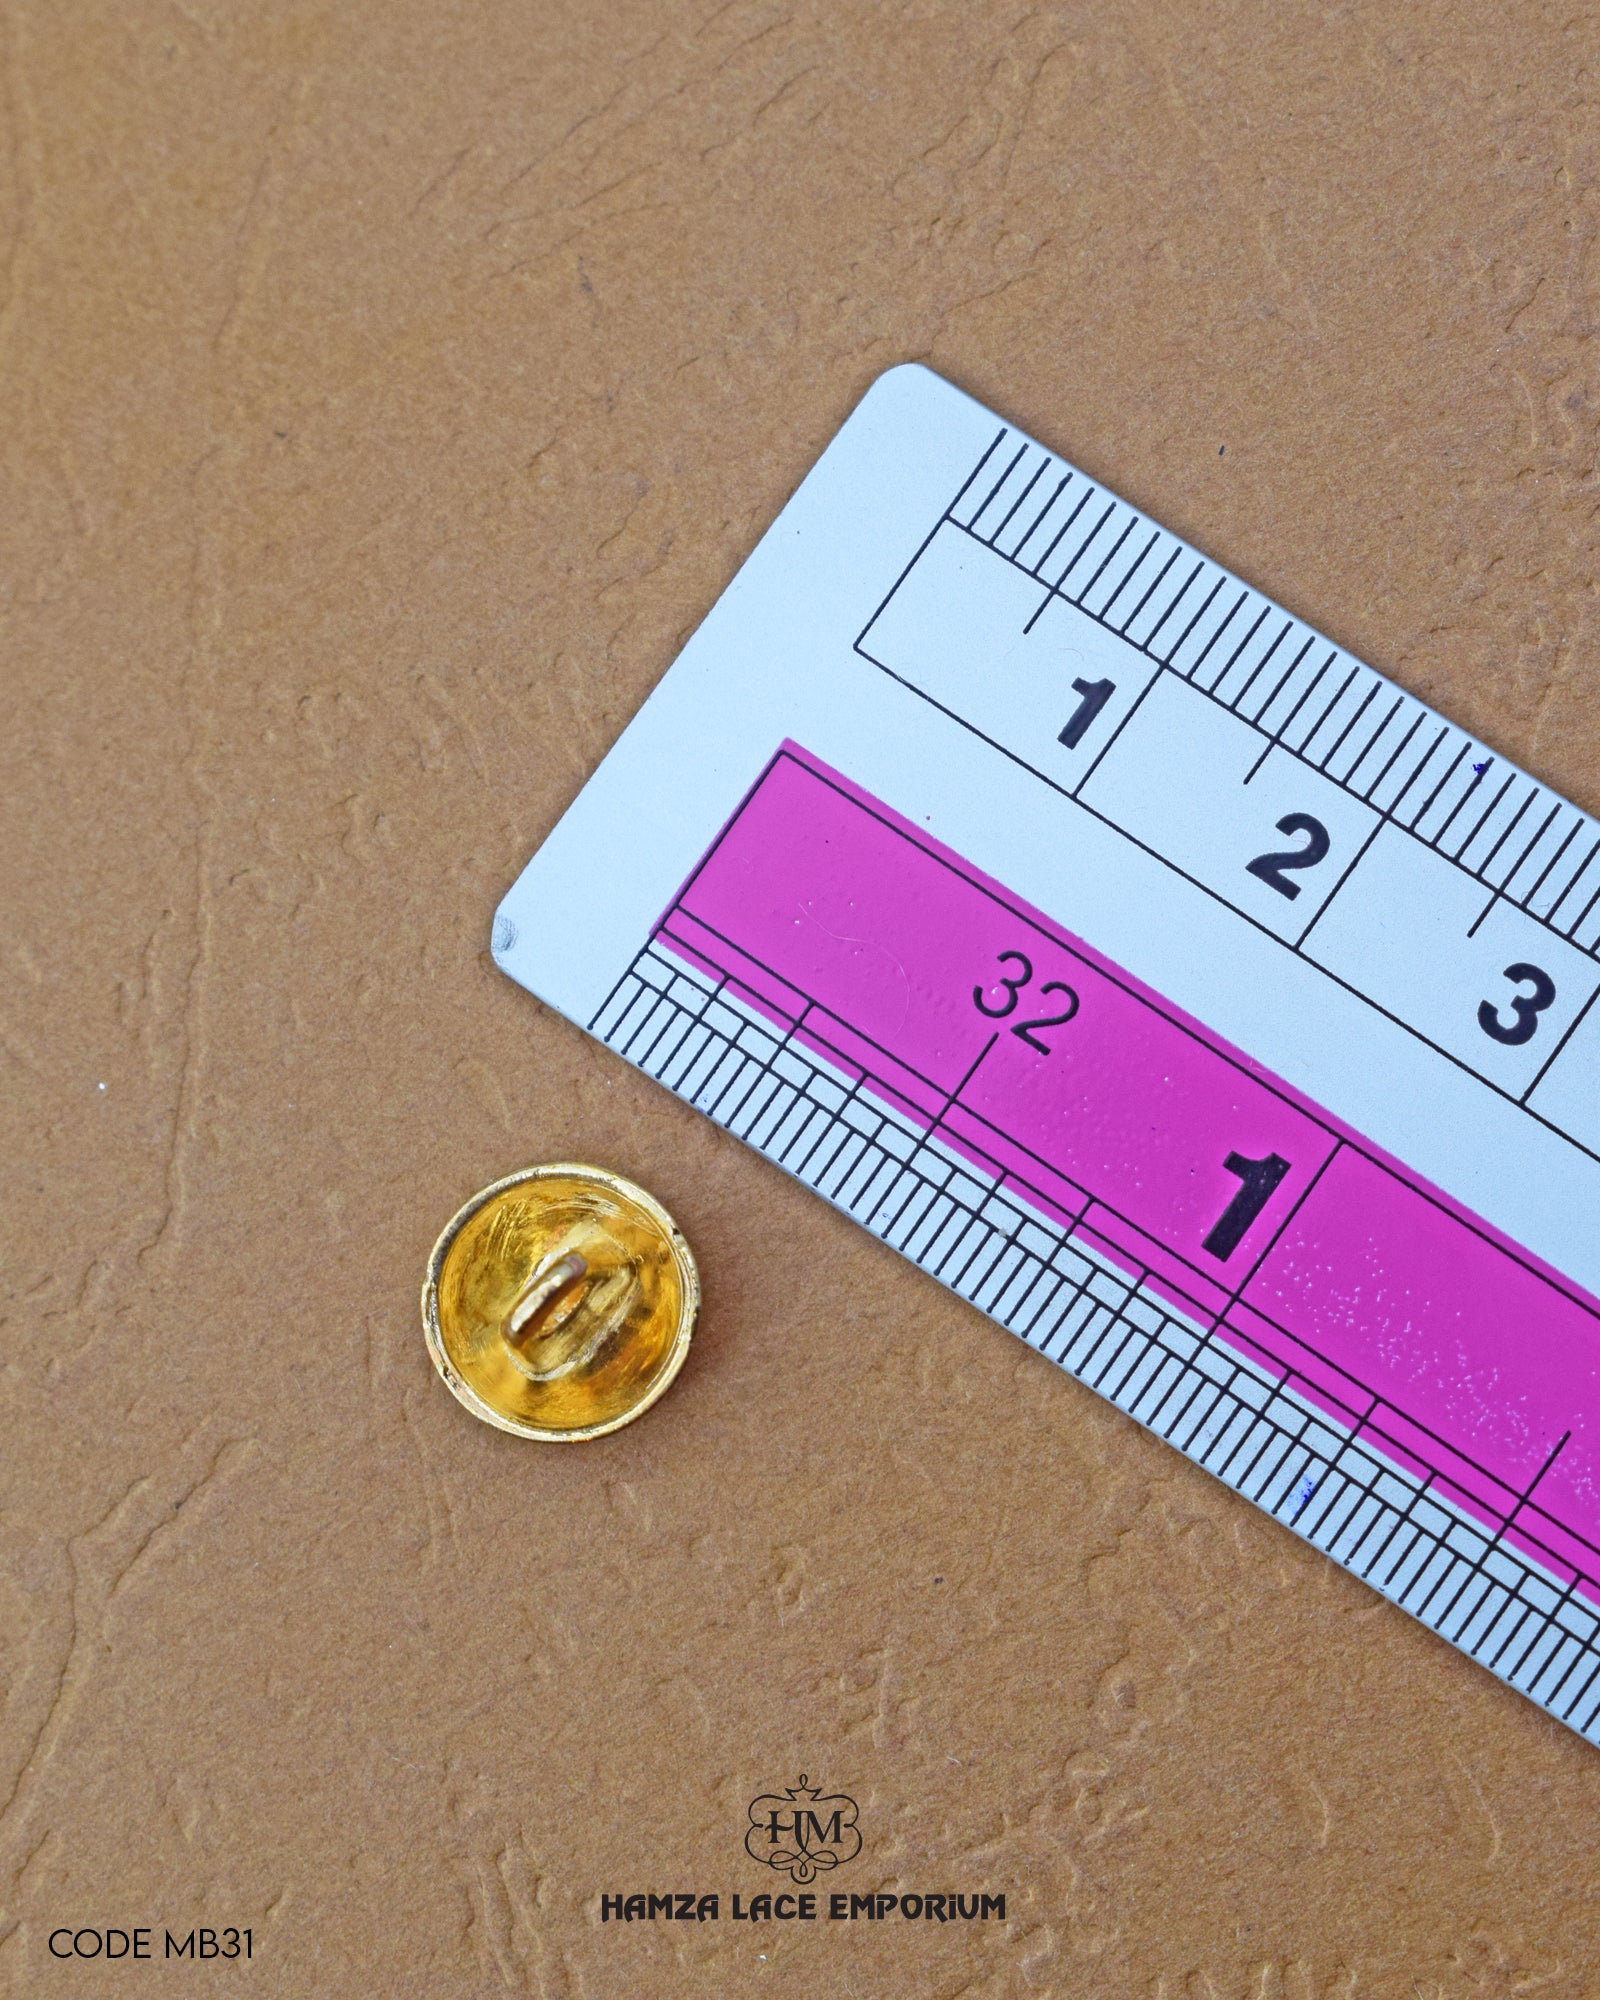 The size of the 'Golden Metal Button MB31' is measured using a ruler